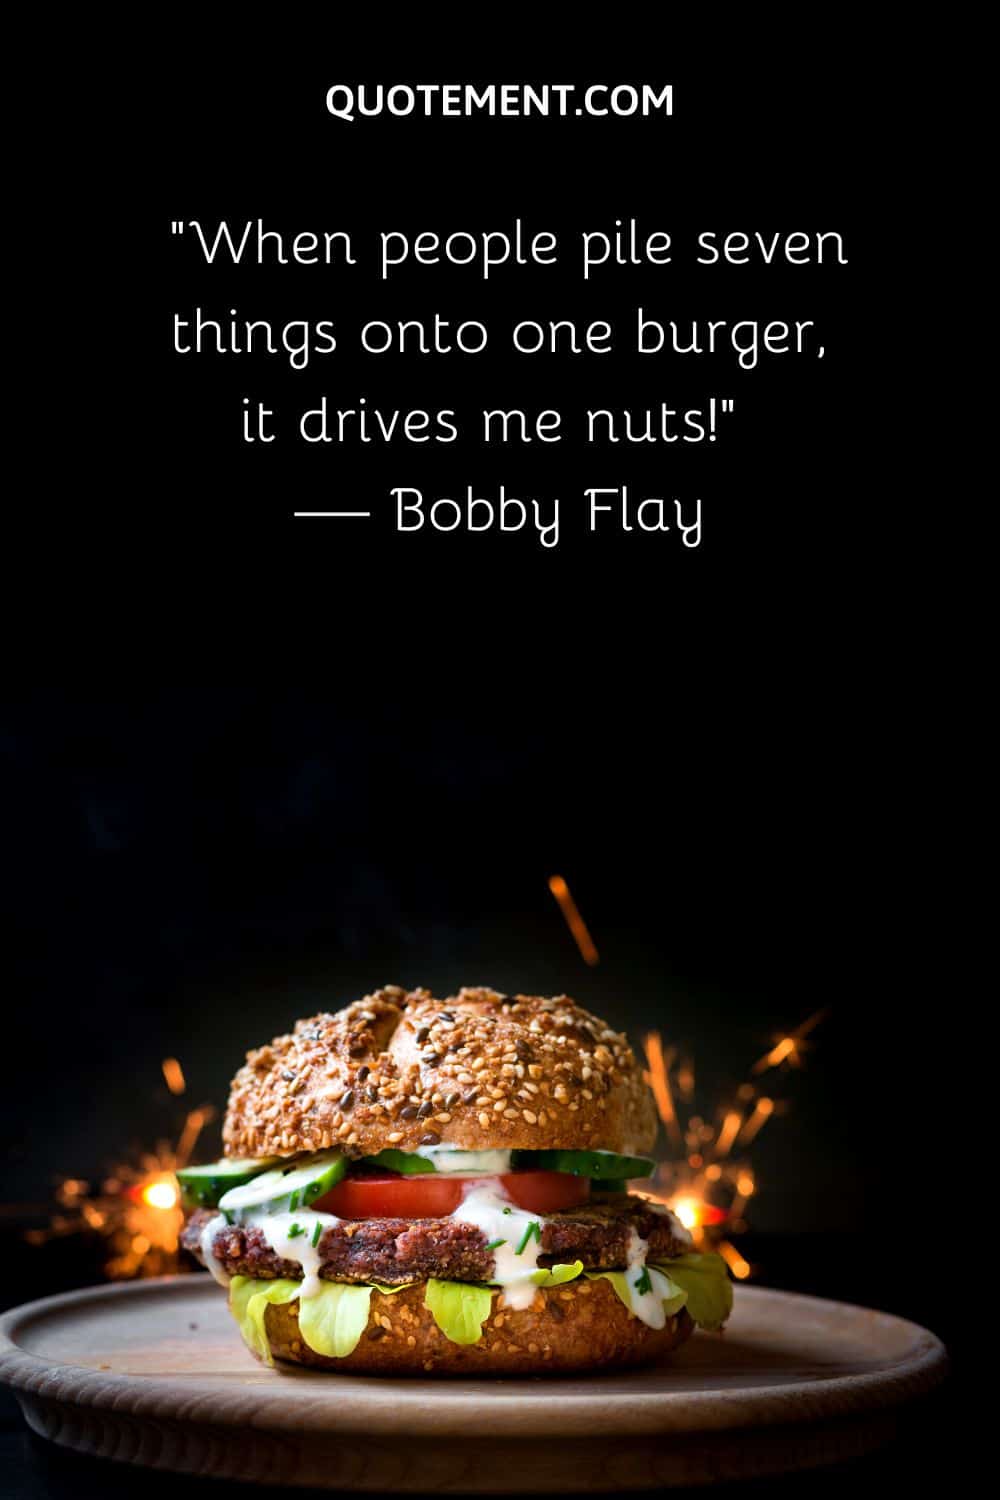 “When people pile seven things onto one burger, it drives me nuts!” — Bobby Flay